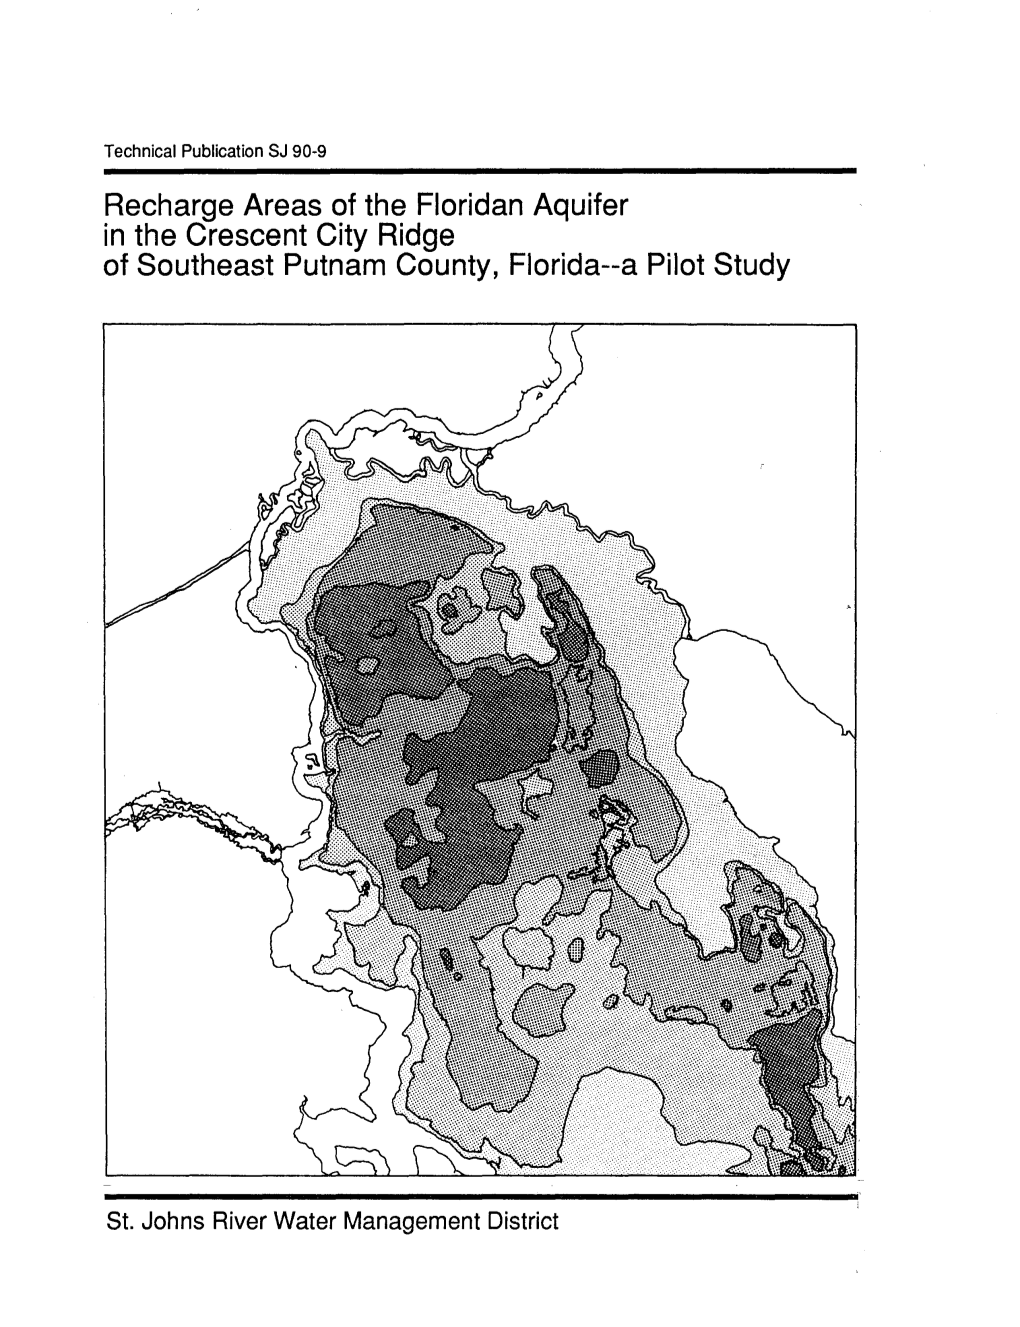 Recharge Areas of the Floridan Aquifer in the Crescent City Ridge of Southeast Putnam County, Florida--A Pilot Study